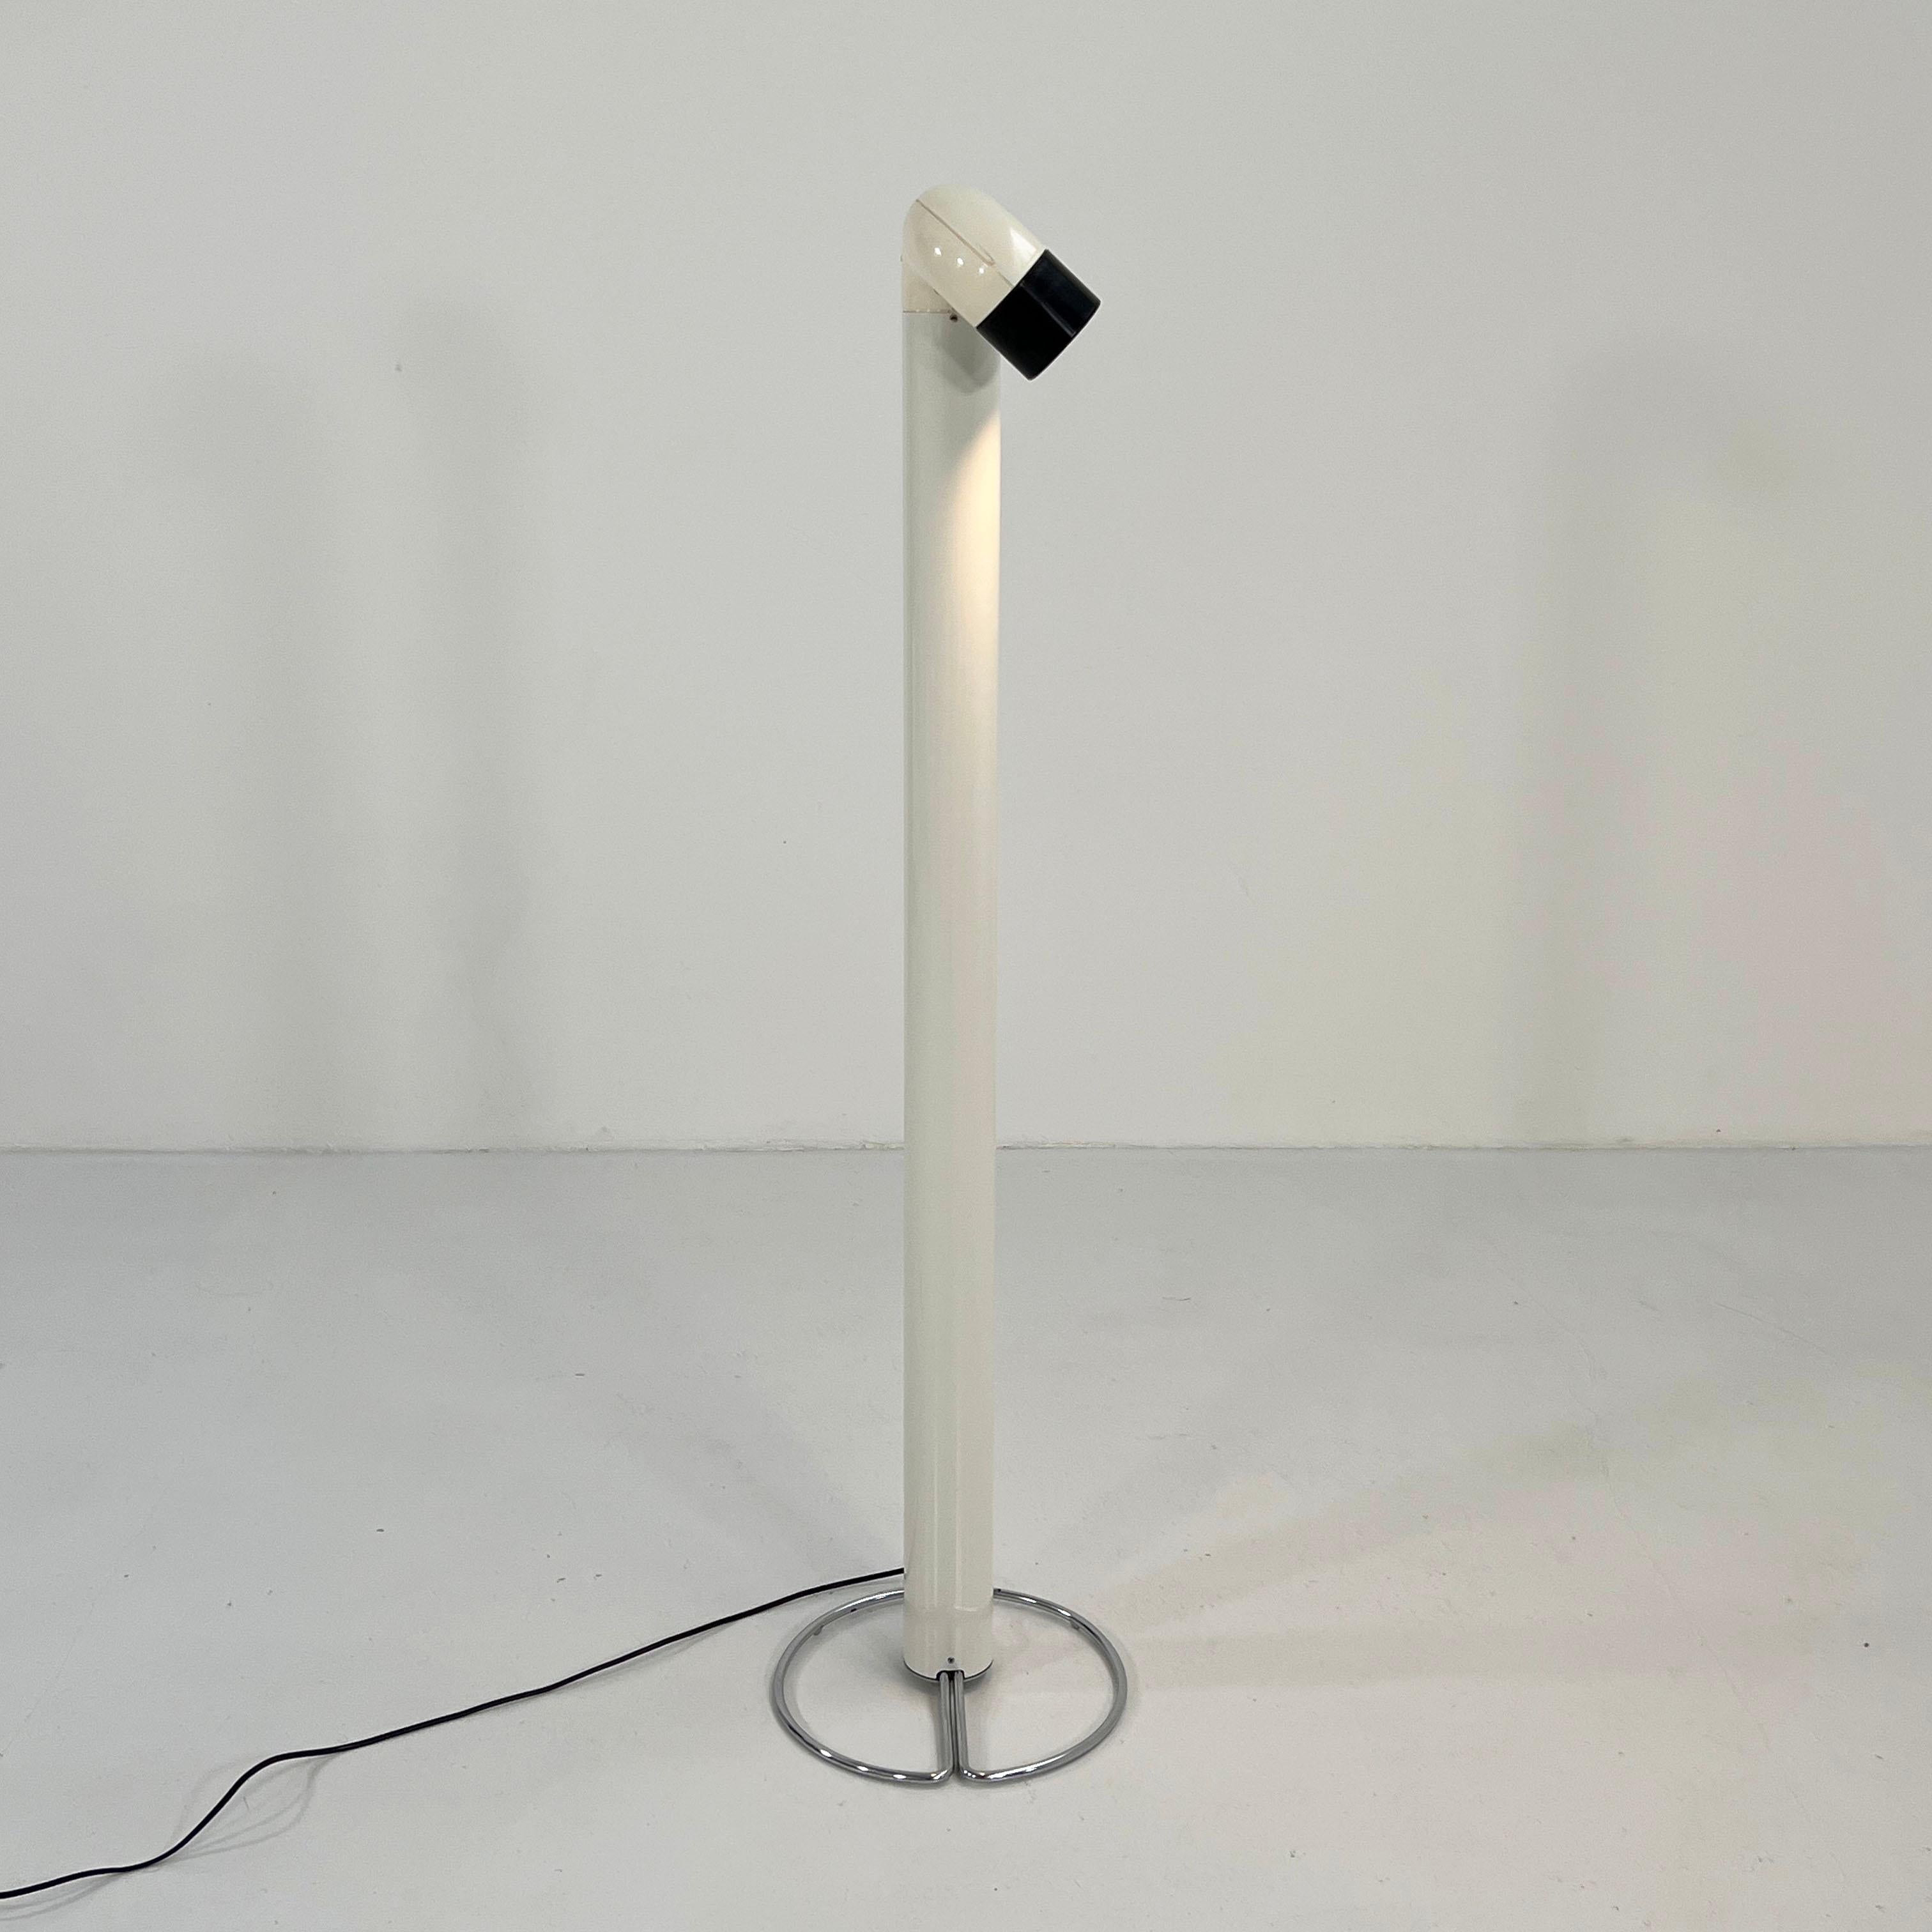 Metal Flamingo Floor Lamp by Kwok Hoi Chan for Concord, 1960s For Sale